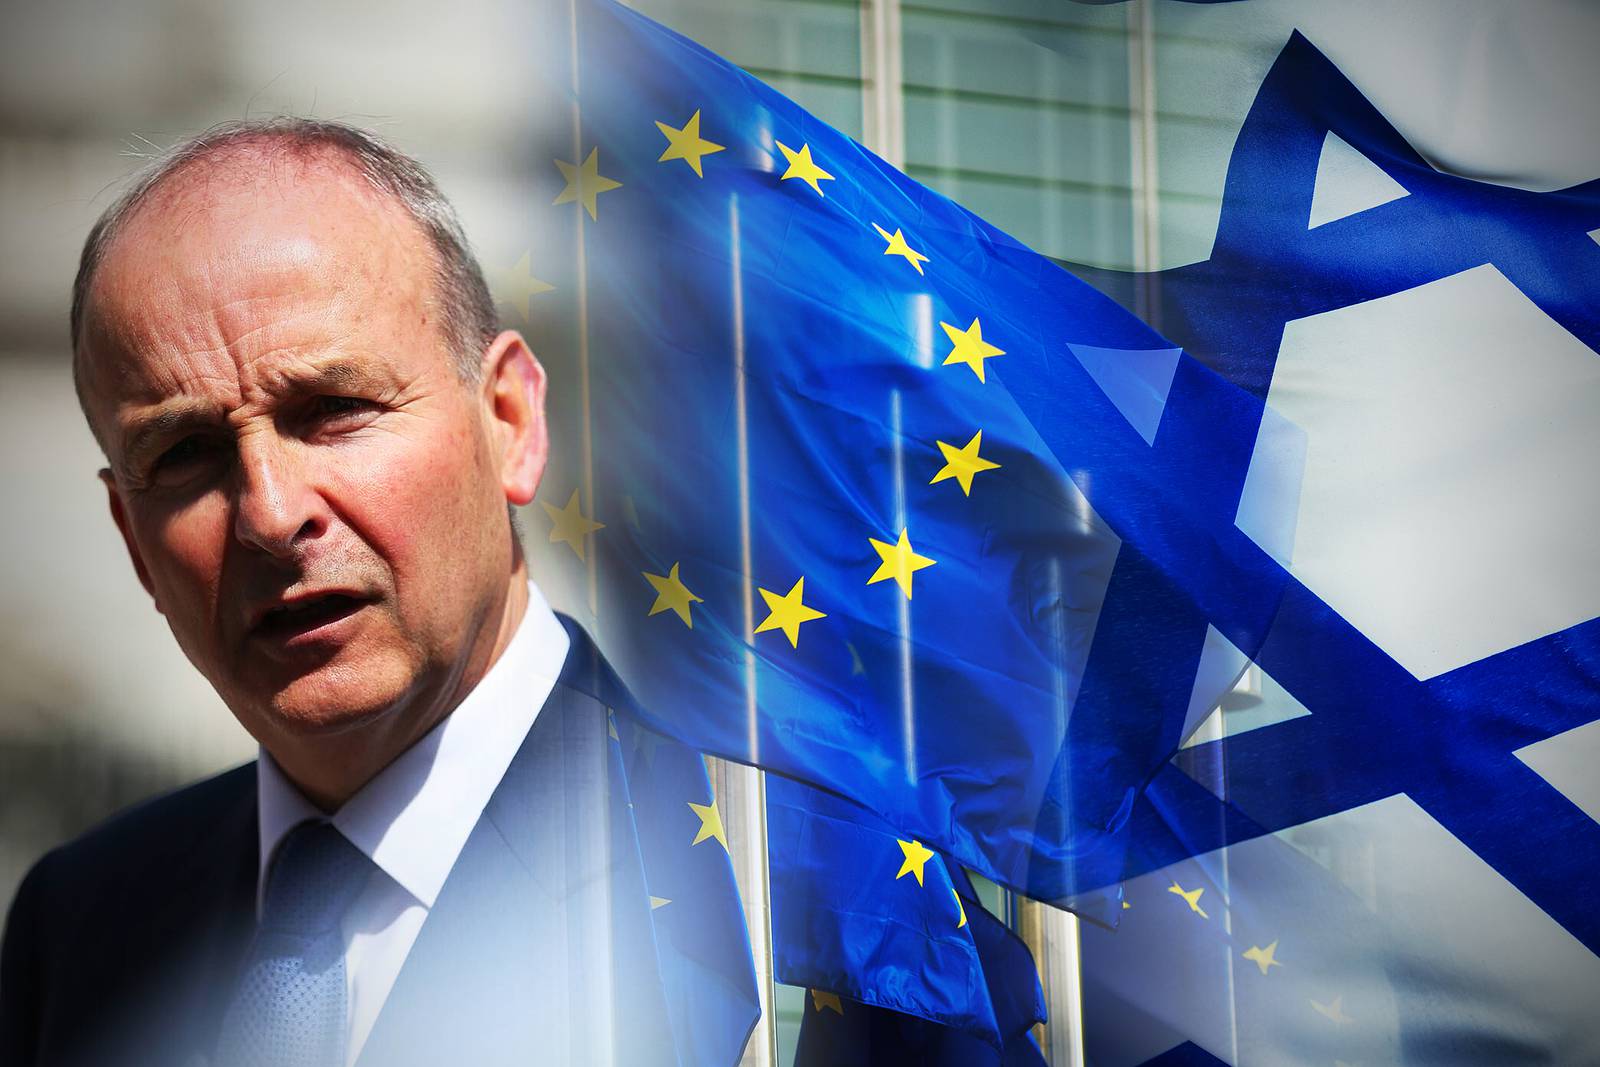 Micheál Martin has called on the European Commission to state that funding will continue to Unwra.